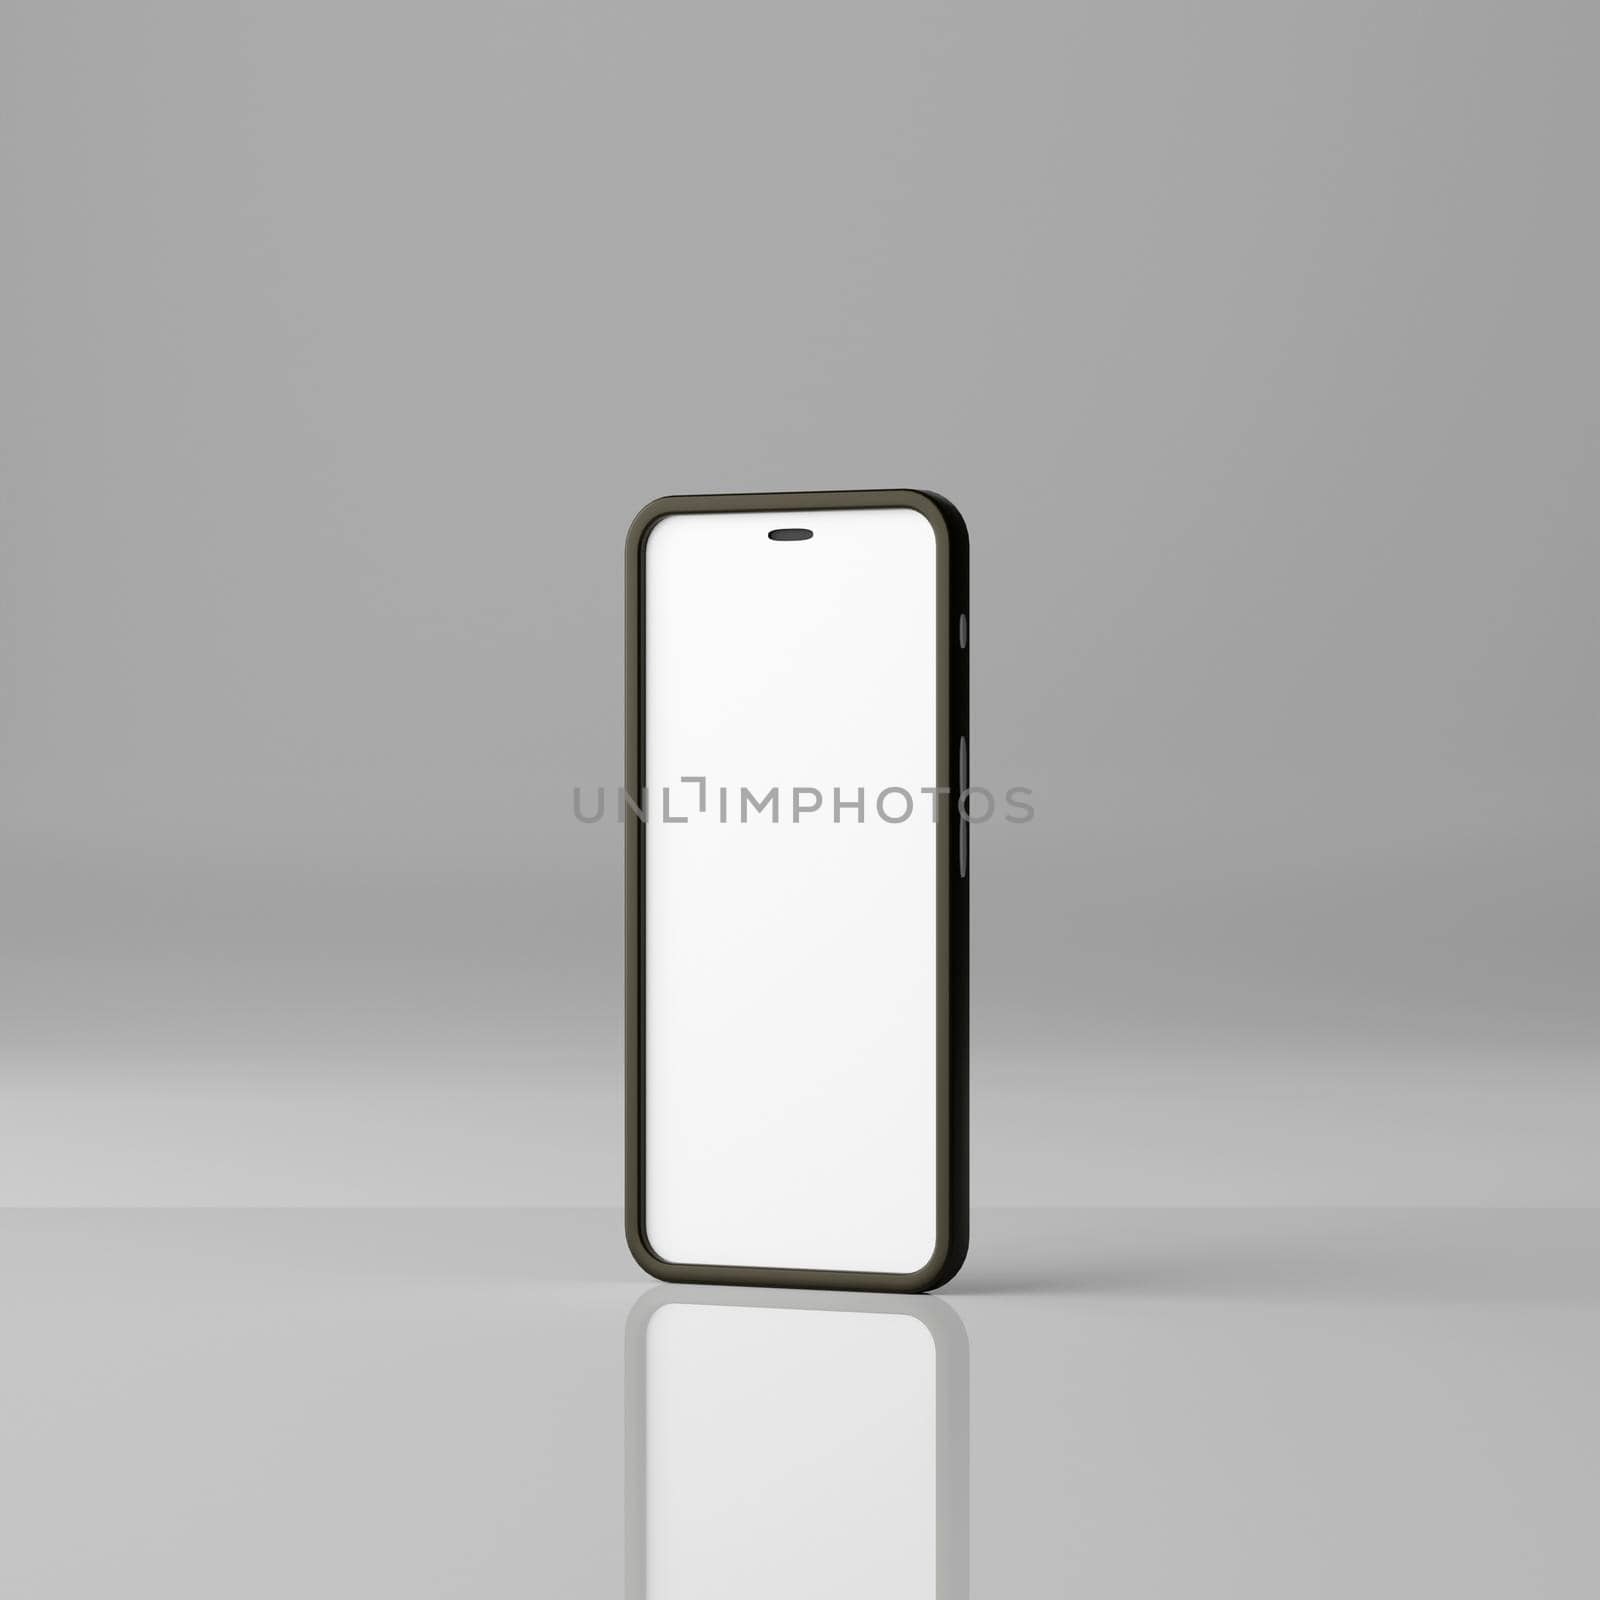 Smartphone mockup with blank white screen on a grey background. 3D Render by raferto1973